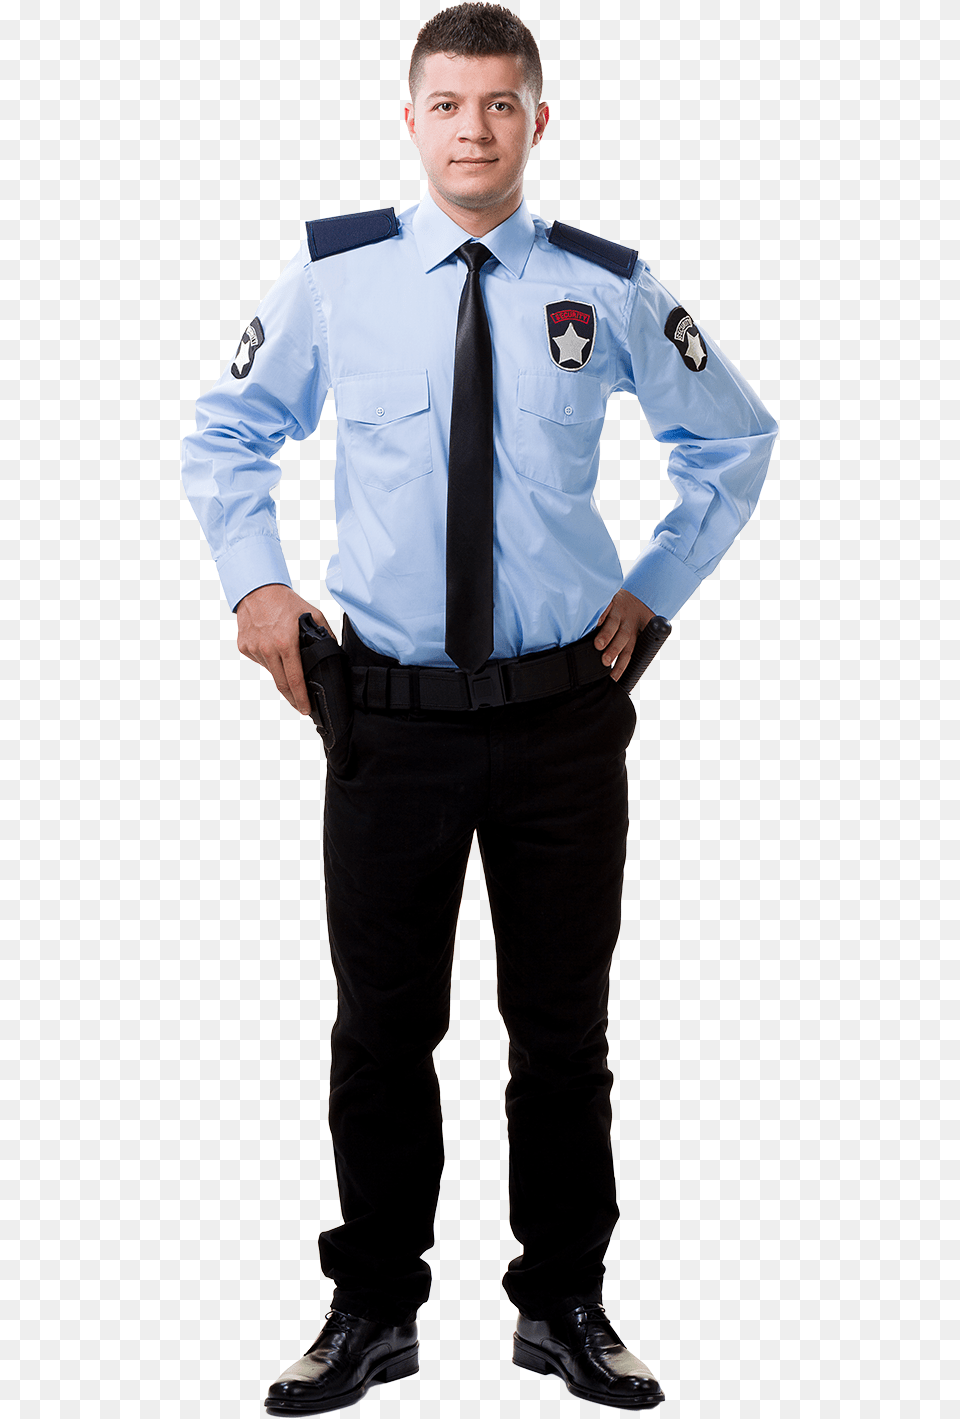 Police Officer Security Guard Uniform Security Guard Uniform, Clothing, Shirt, Person, Adult Png Image